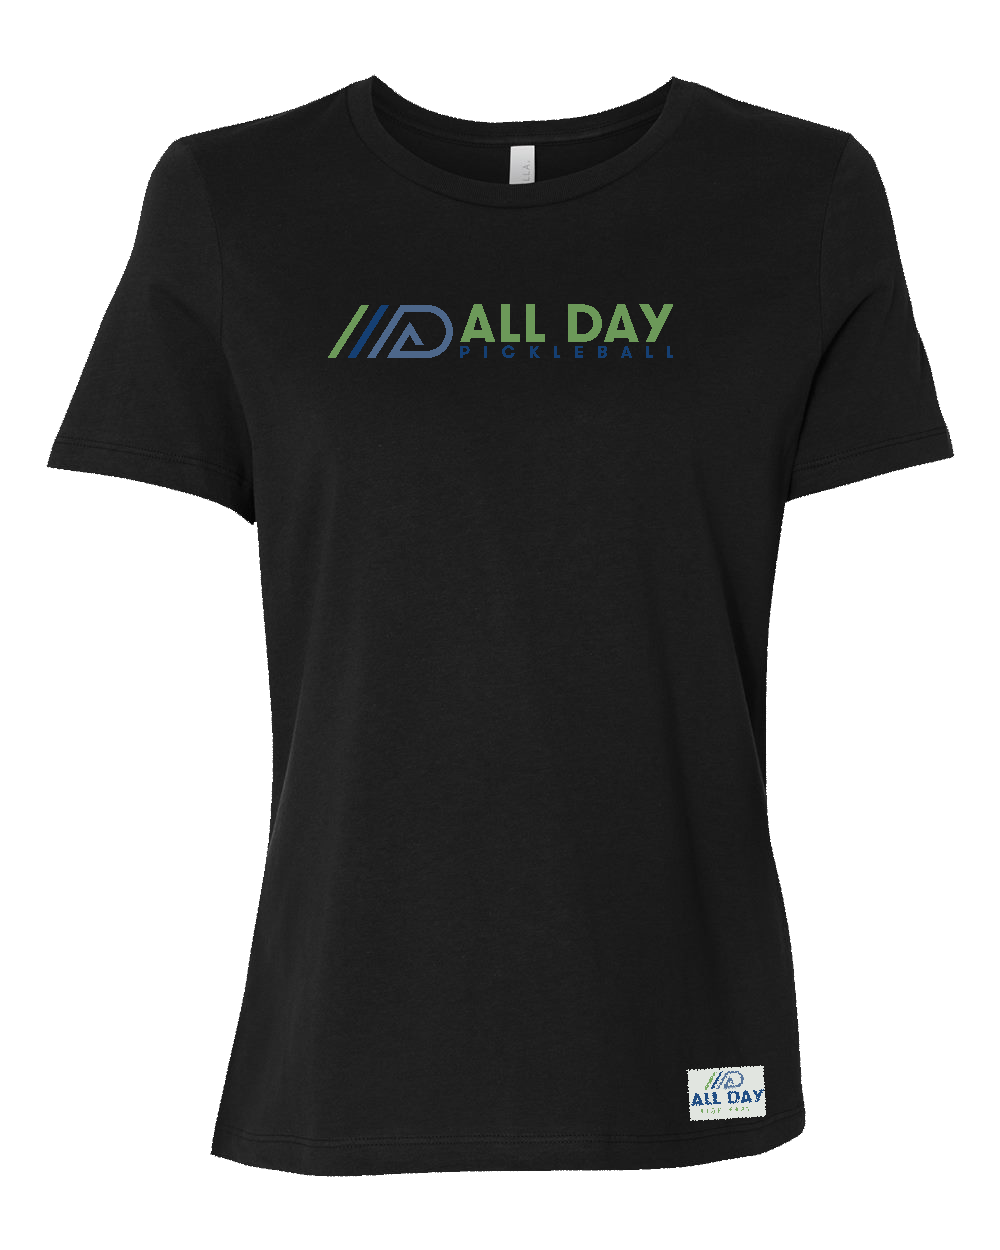 All Day Pickleball - Women's Relaxed Fit - Tee